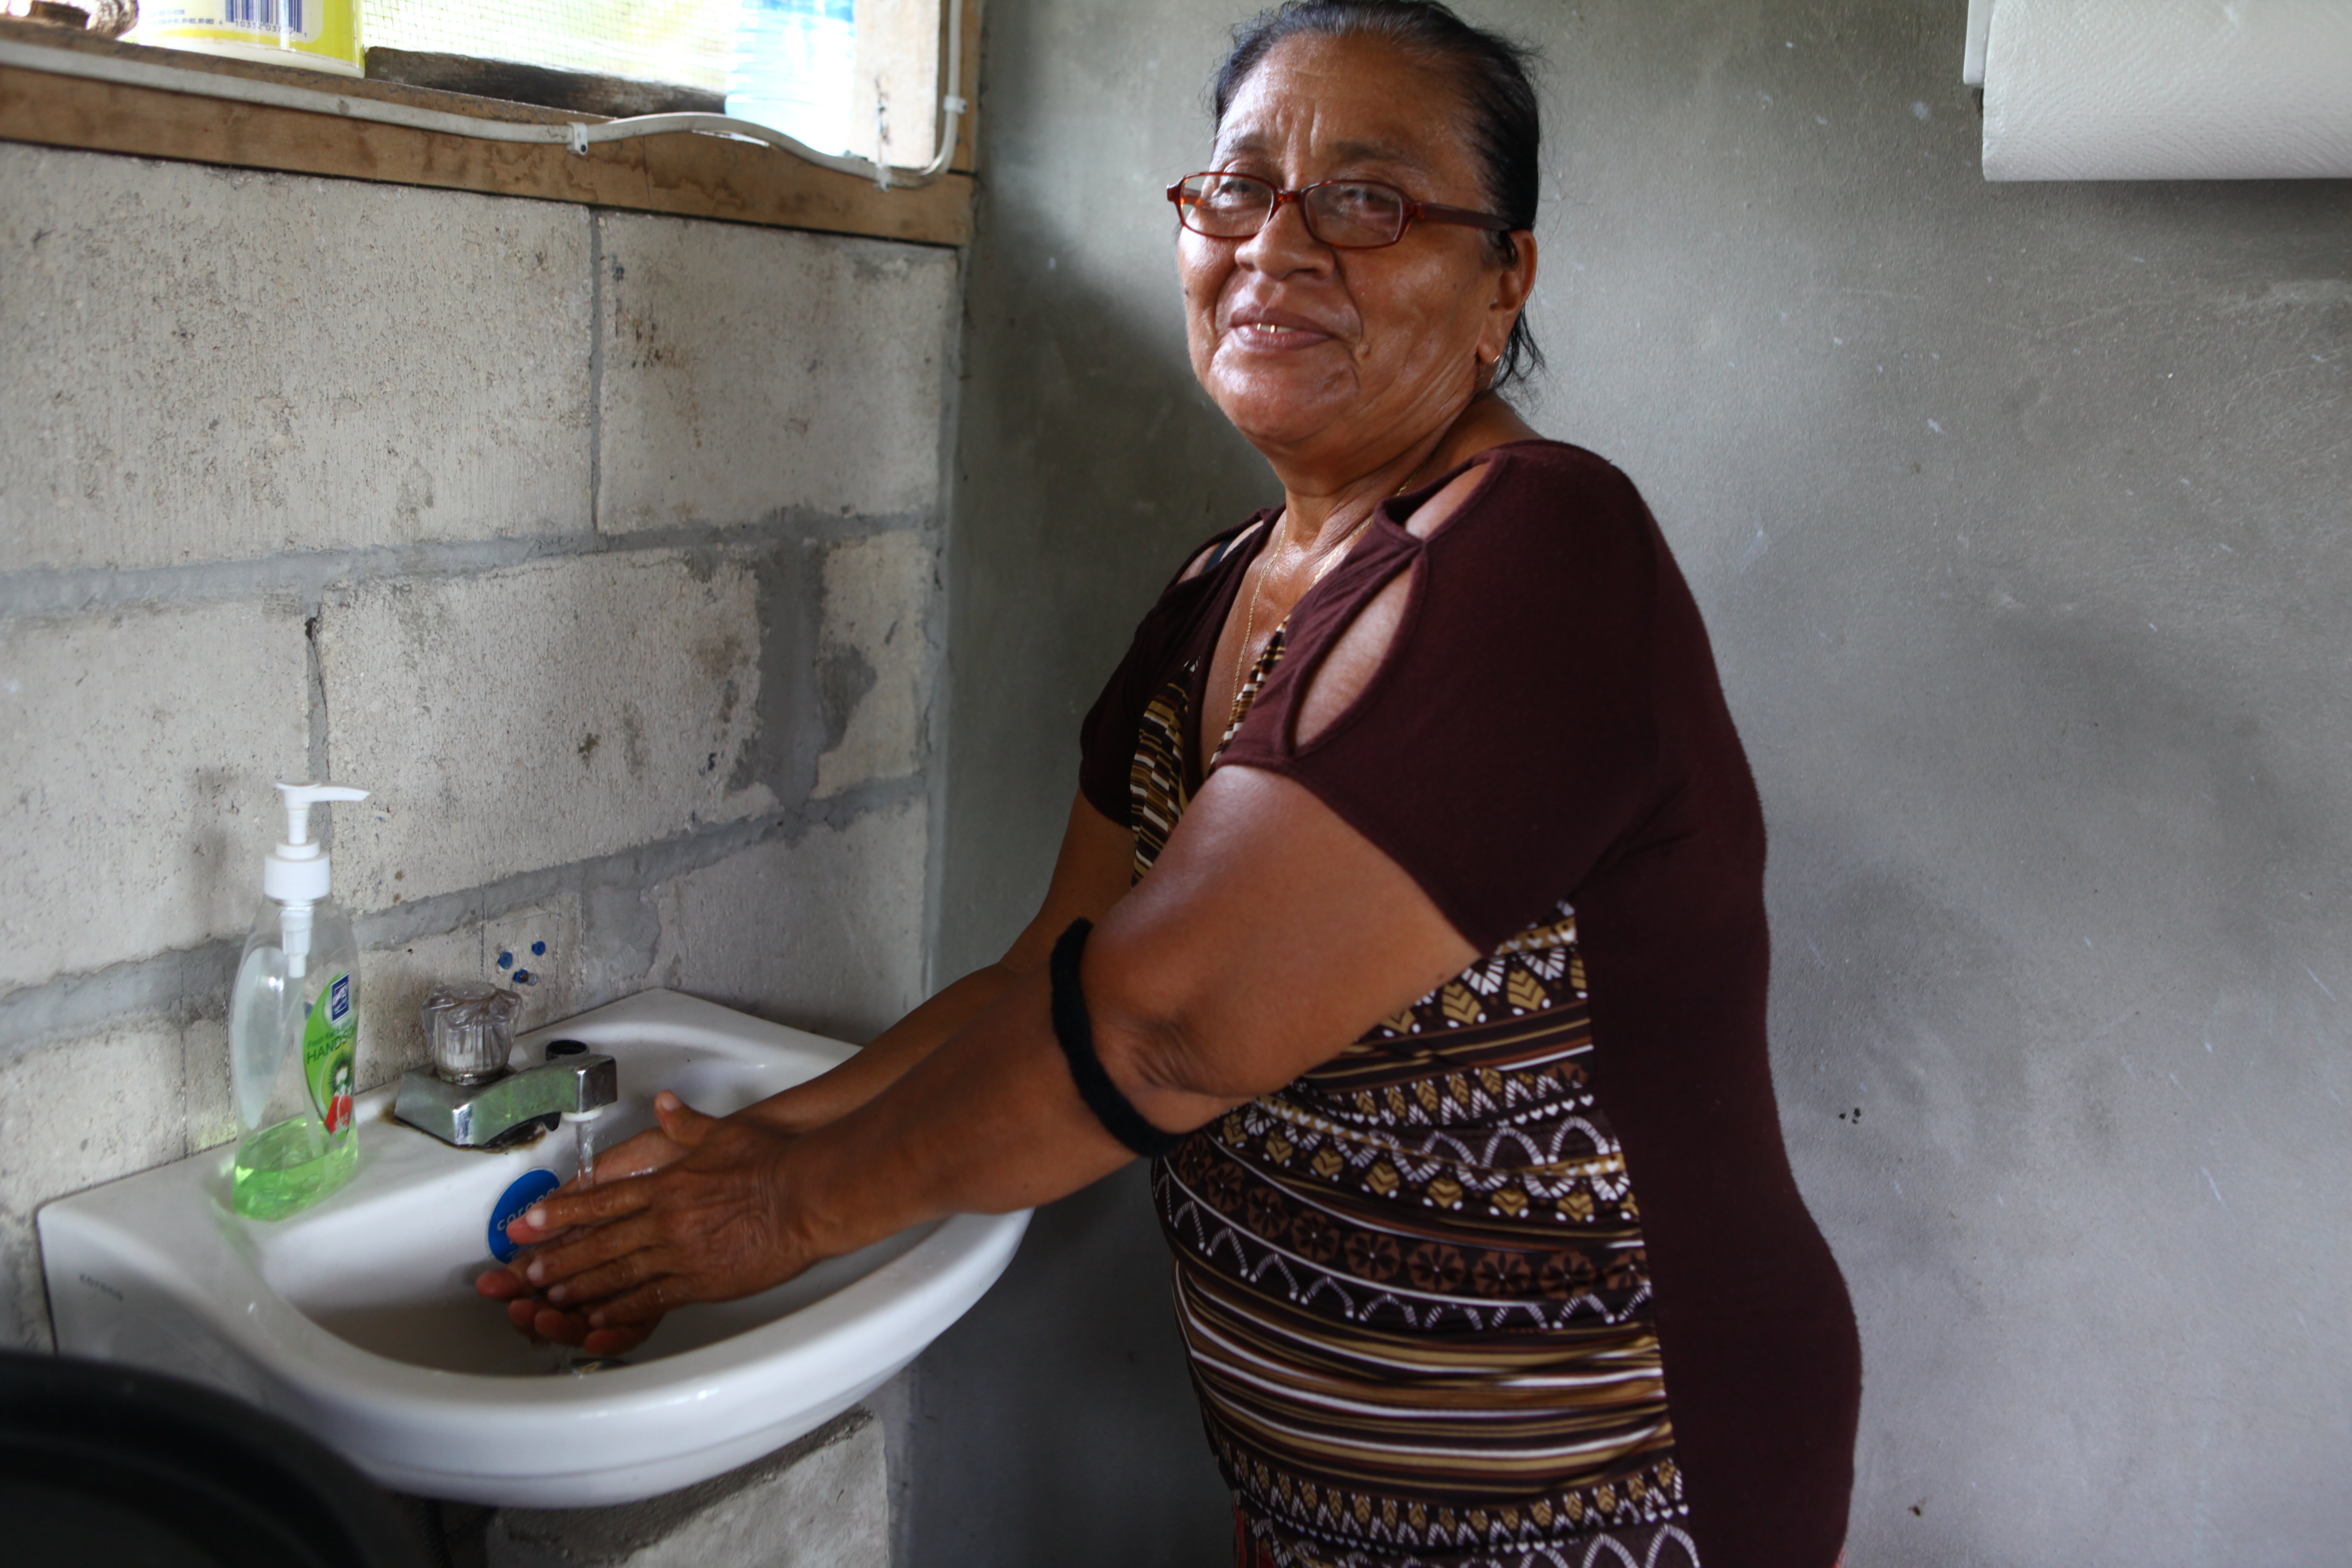 Juanita Banner washes her hands at home